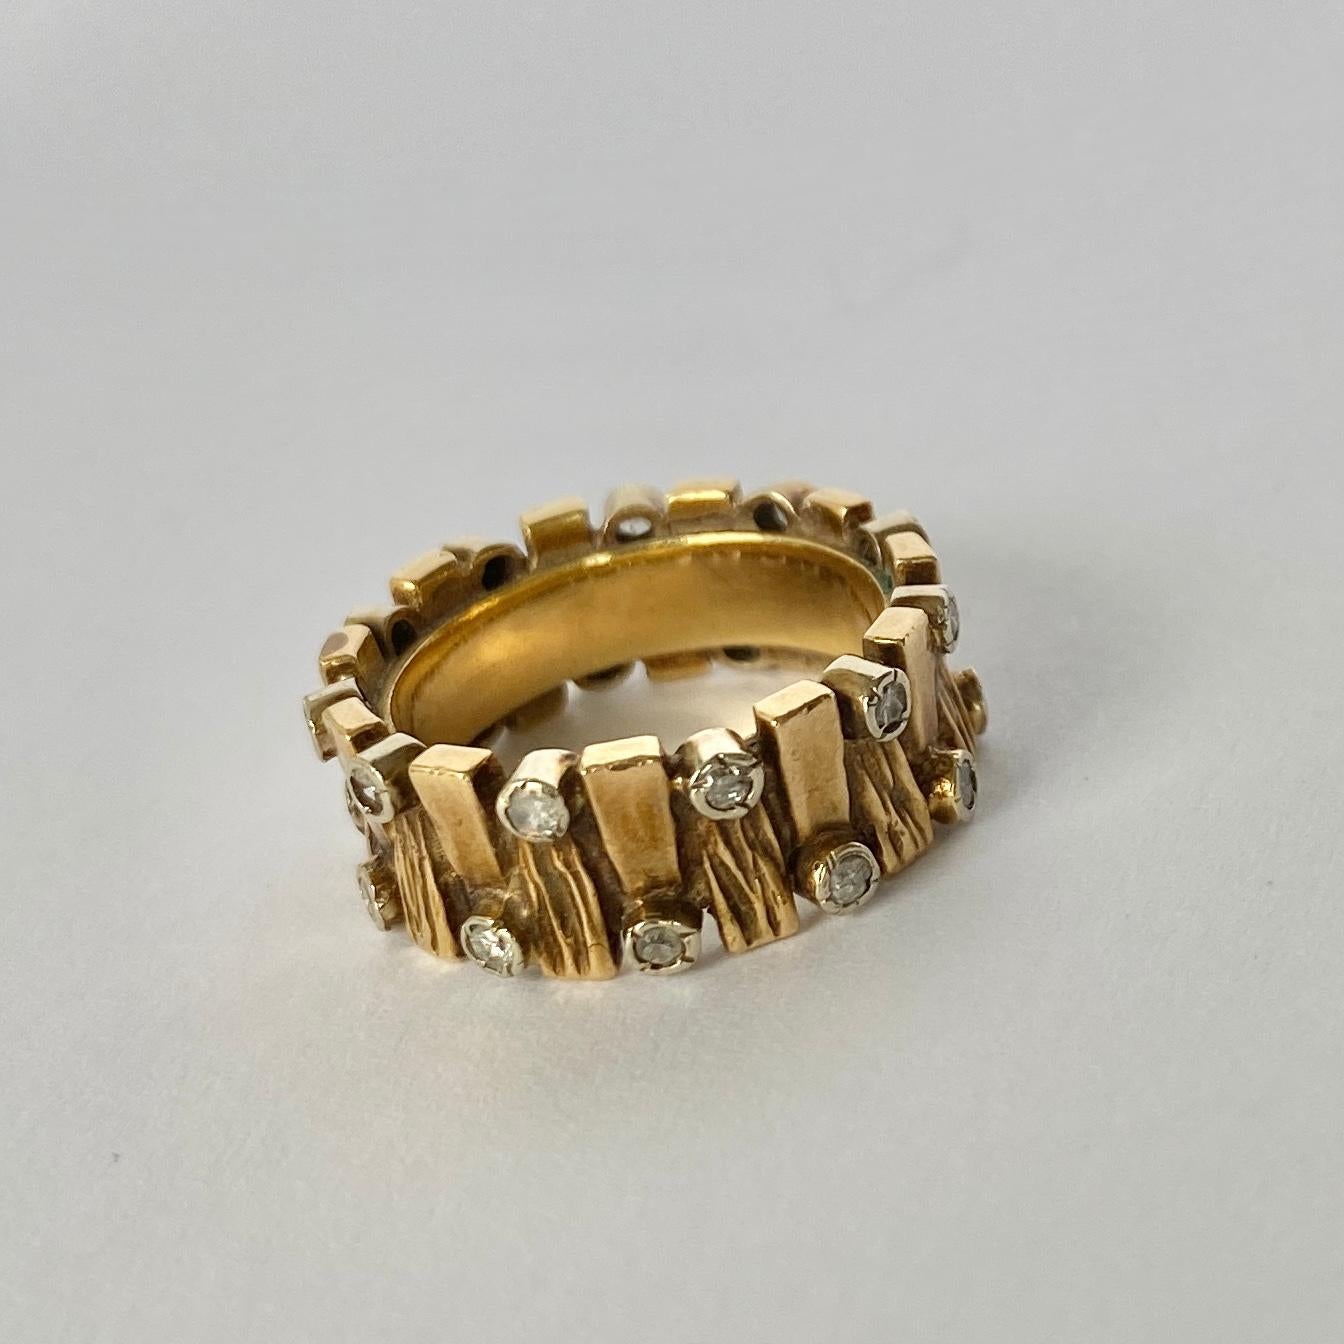 This textured 18carat gold band holds 22 diamonds totalling 45pts. The stones are set in simple platinum settings. 

Ring Size: H 1/2 or 4 
Band Width: 7mm

Weight: 7.7g